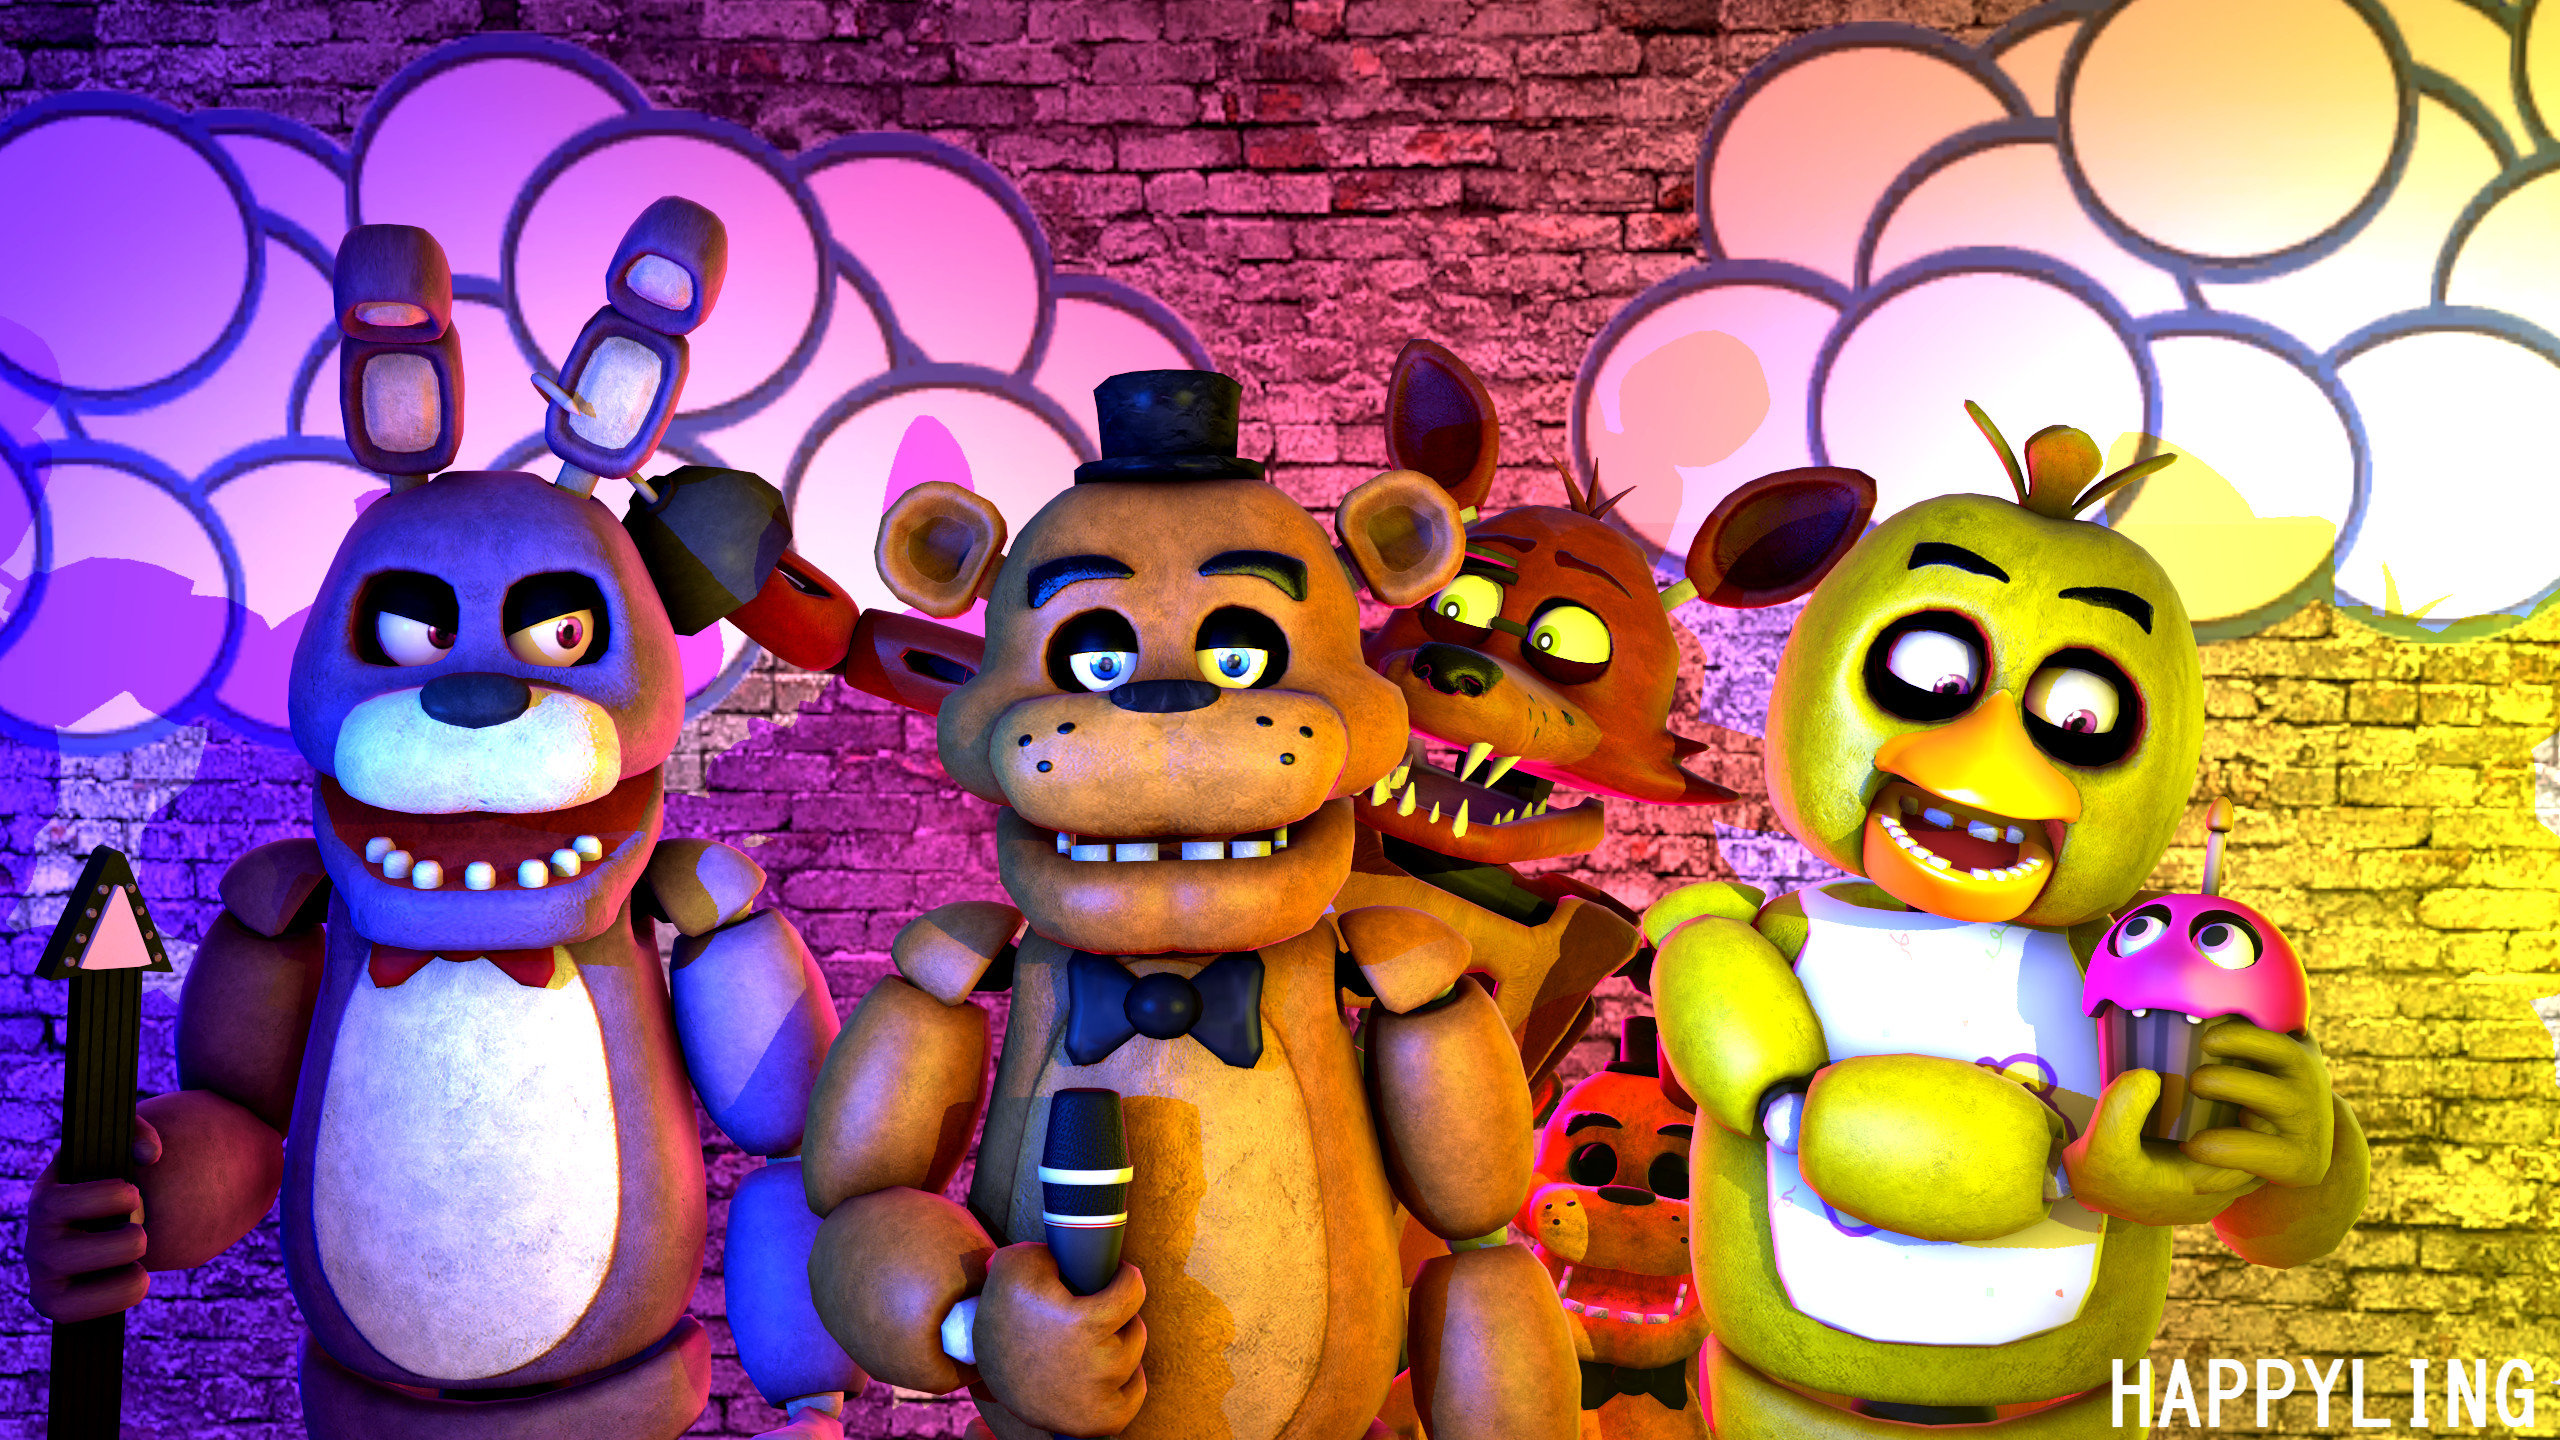 video game, five nights at freddy's, bonnie (five nights at freddy's), chica (five nights at freddy's), foxy (five nights at freddy's), freddy (five nights at freddy's)